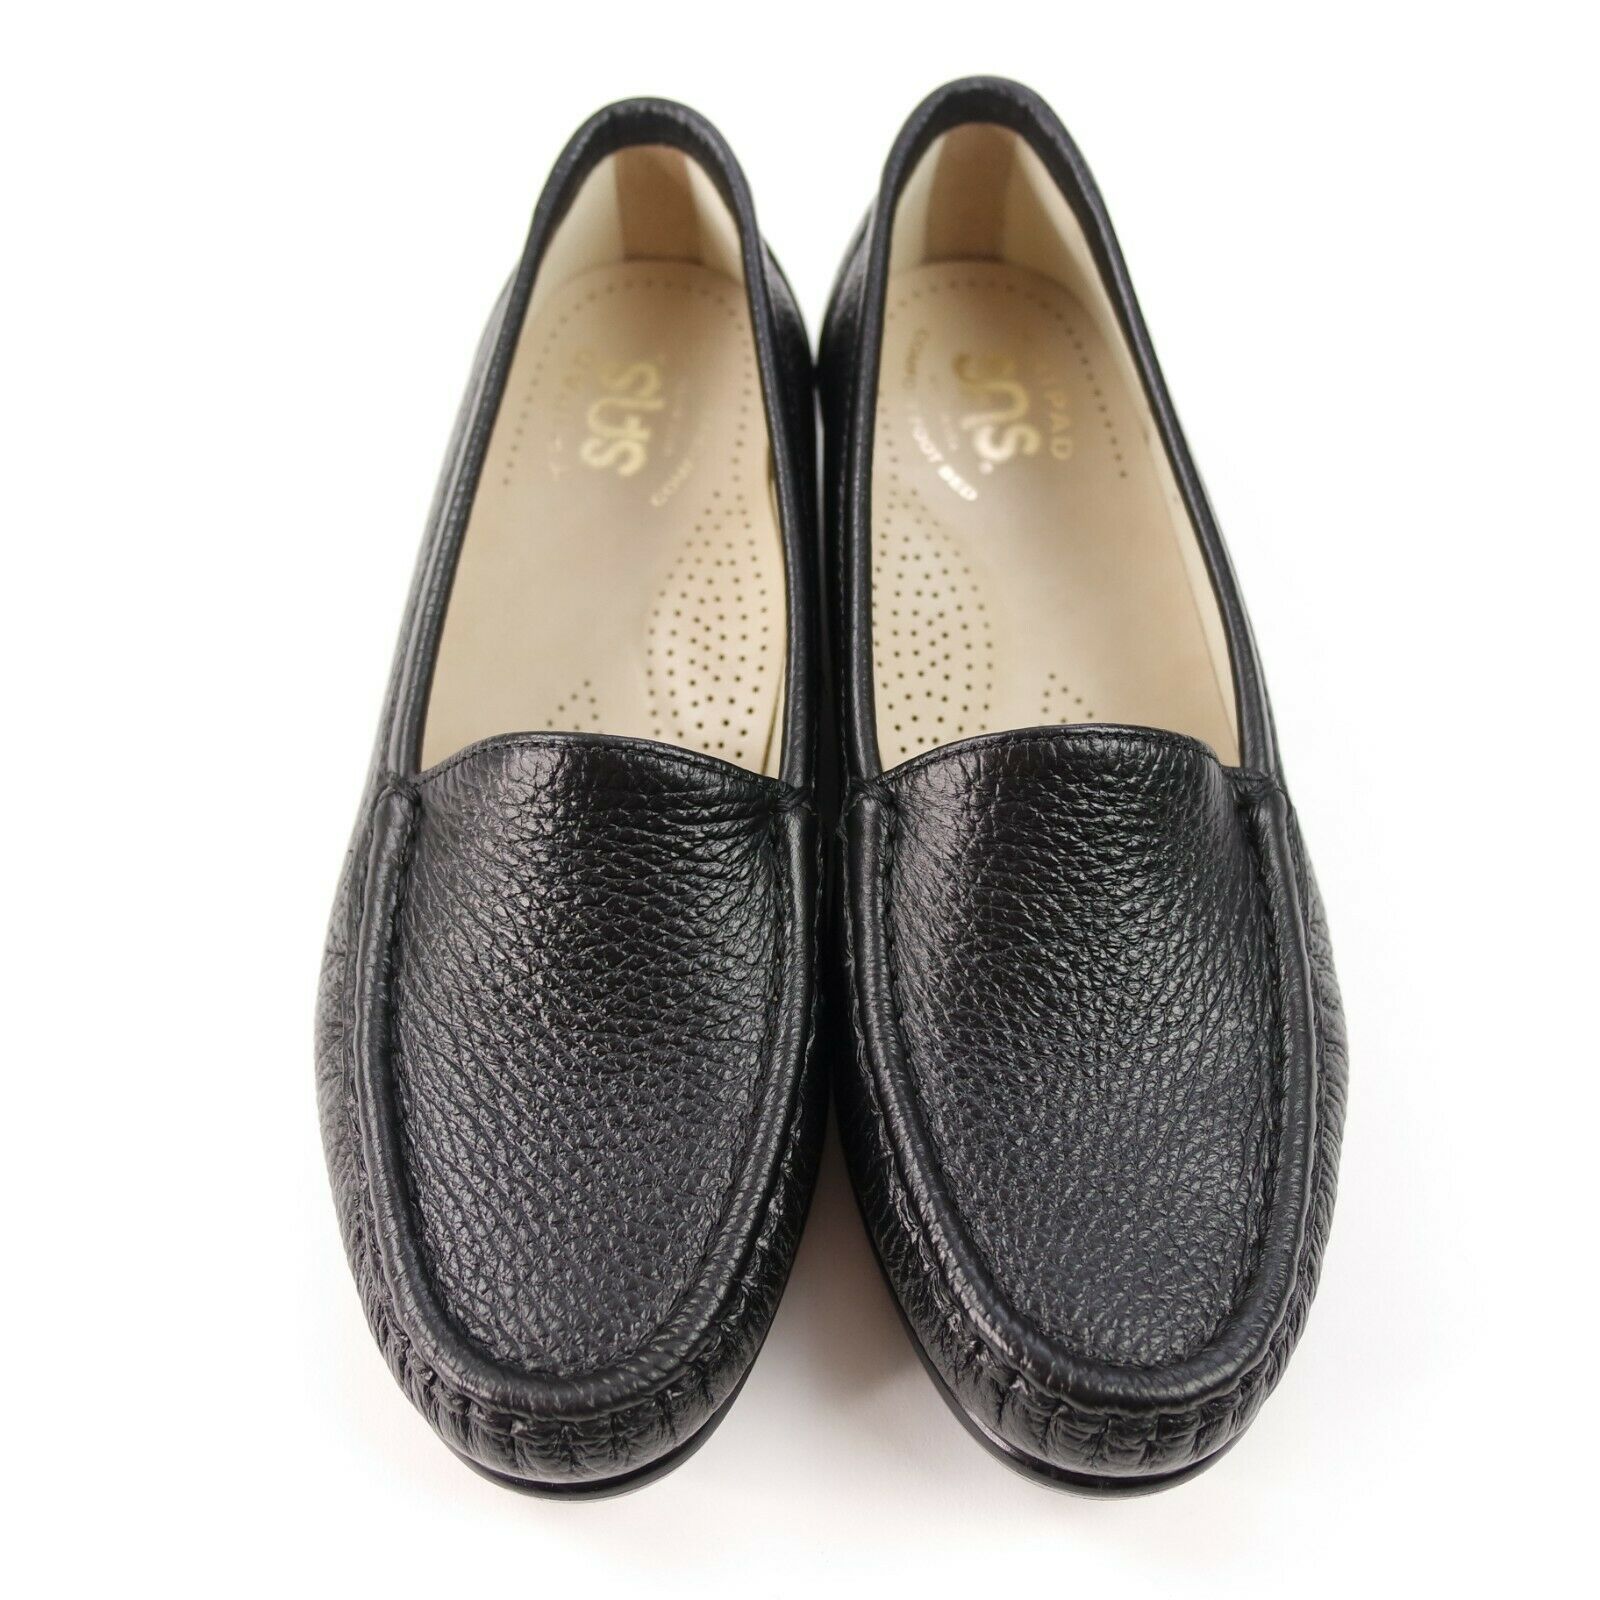 SAS Women's Loafers Black Leather Slip On Shoes Size 6 M Tri-Pad Comfort